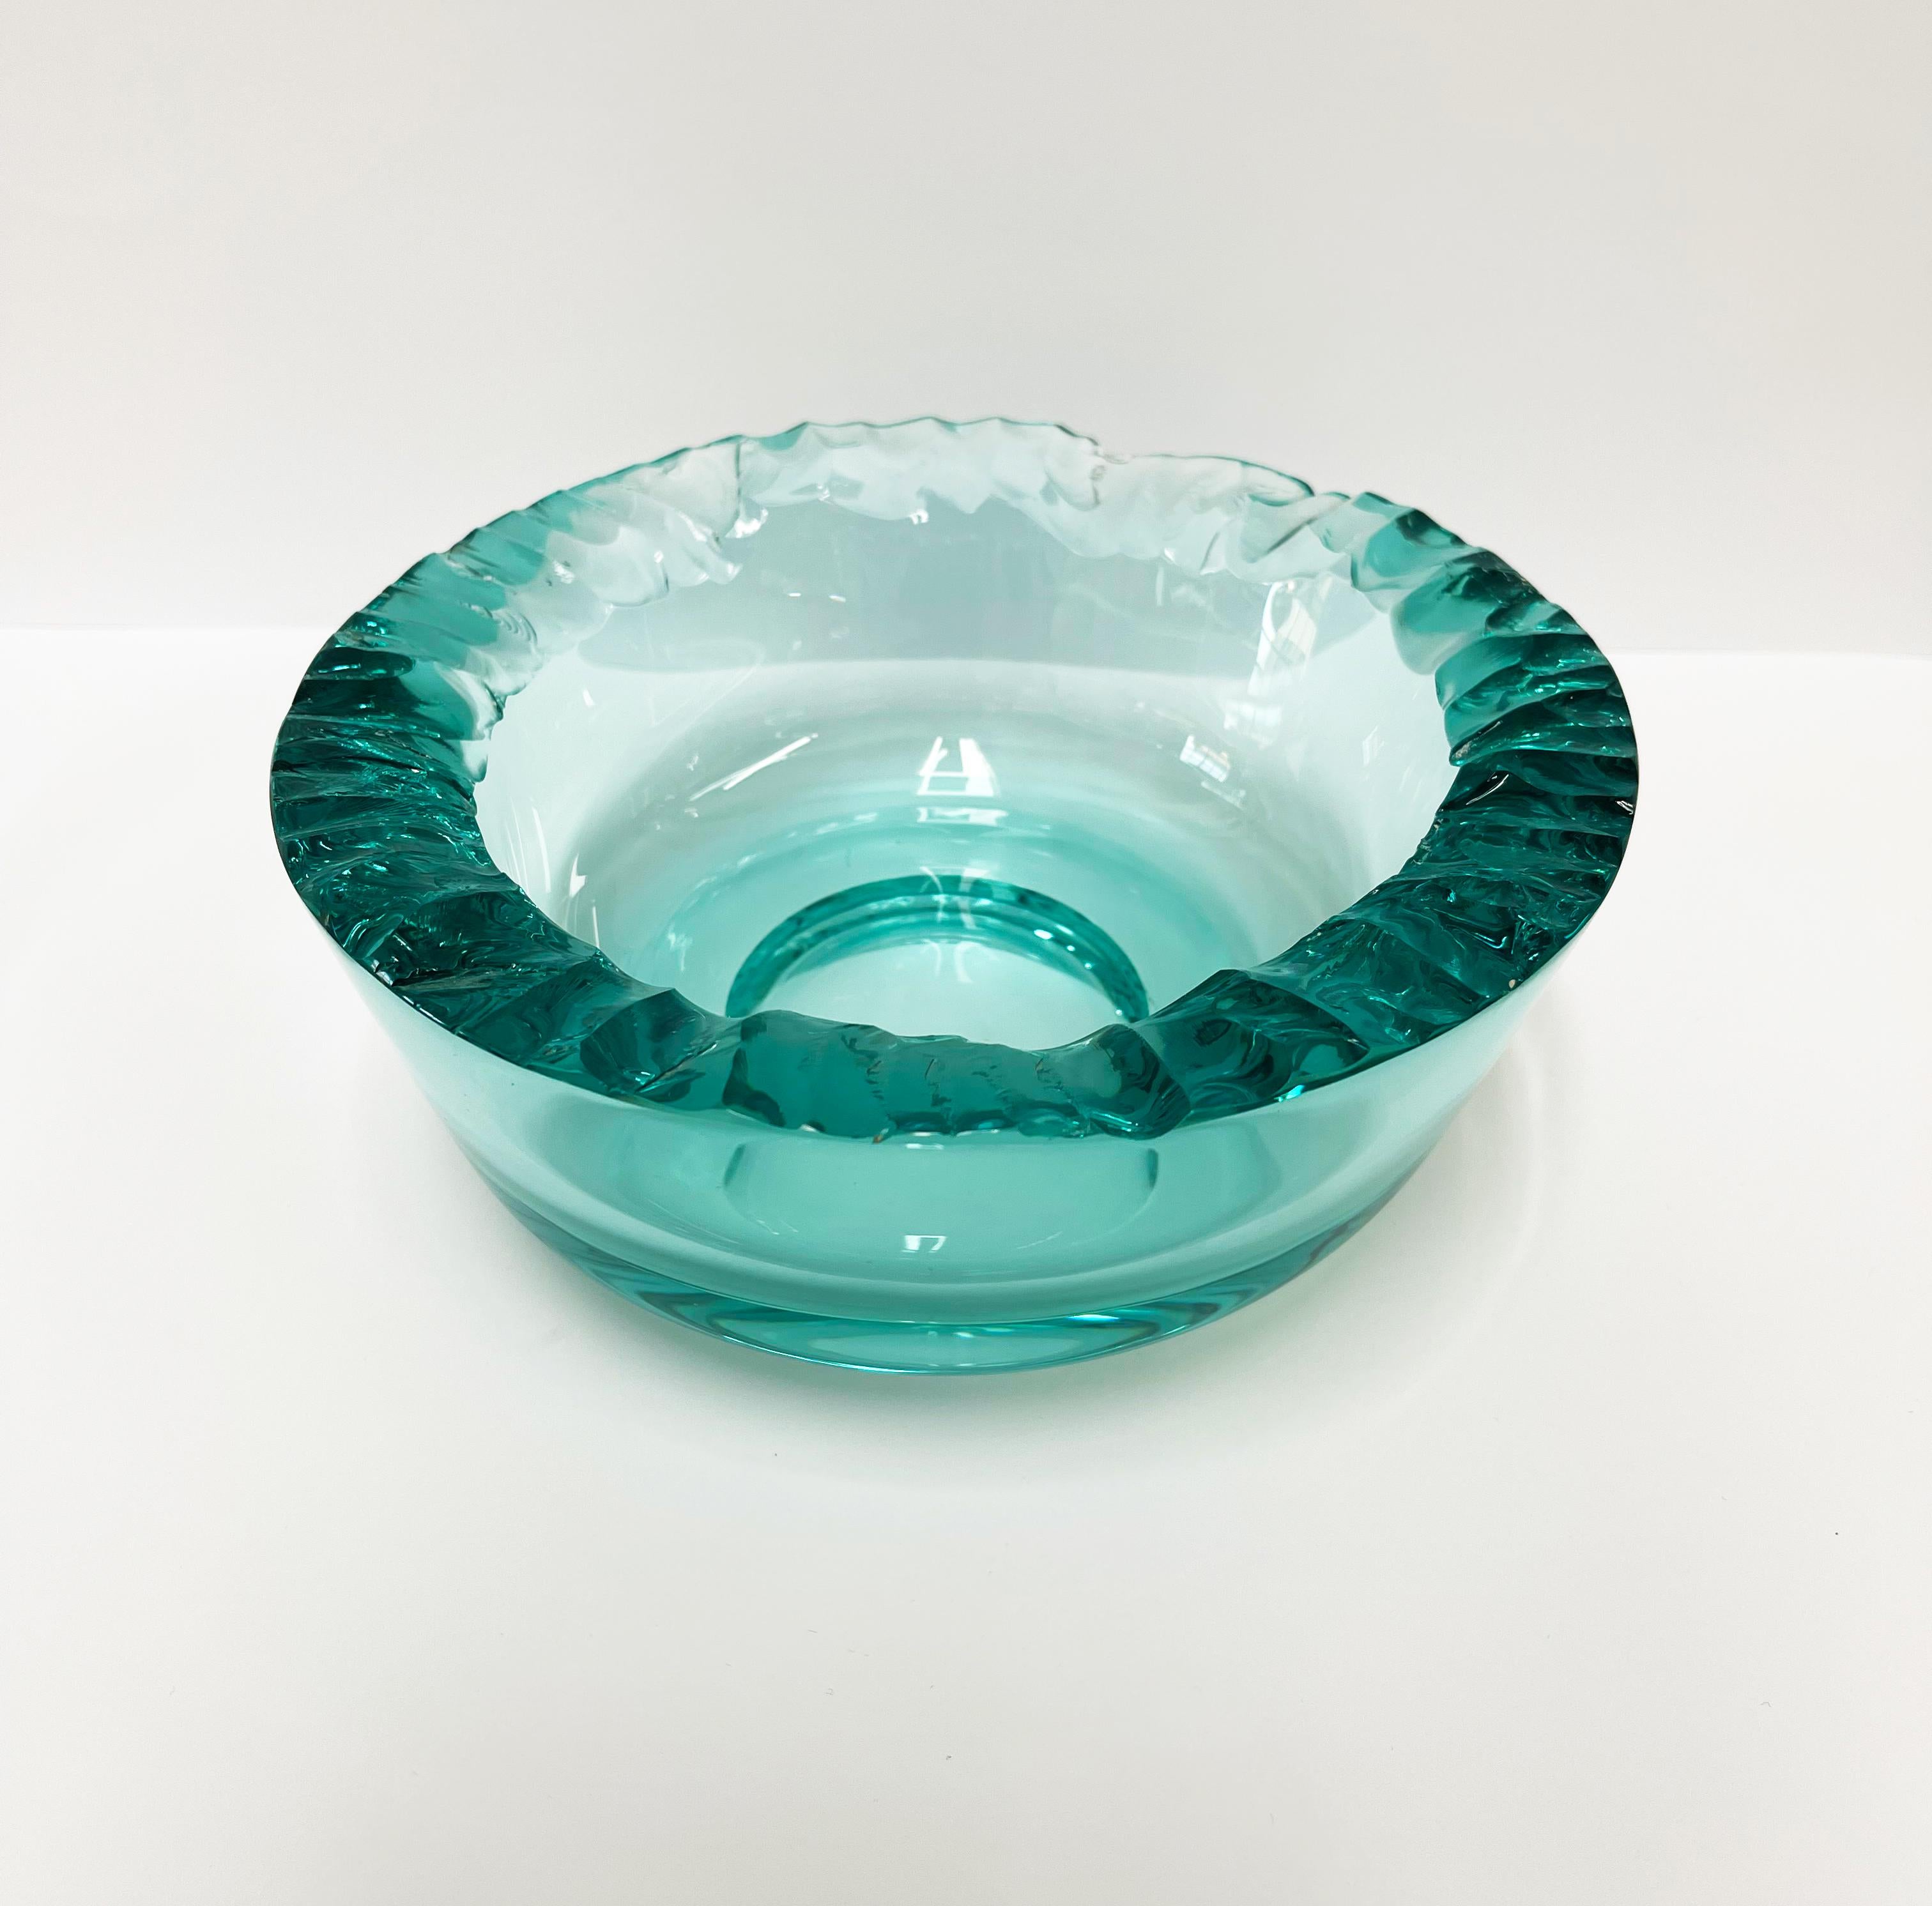 
This object is a handmade artistic sculpture that can be used as a bowl, as a desk accessory, as a jewel case or simply as it is to furnish any environment. This crystal has a high transparency aquamarine green color.
The edges of the bowl have